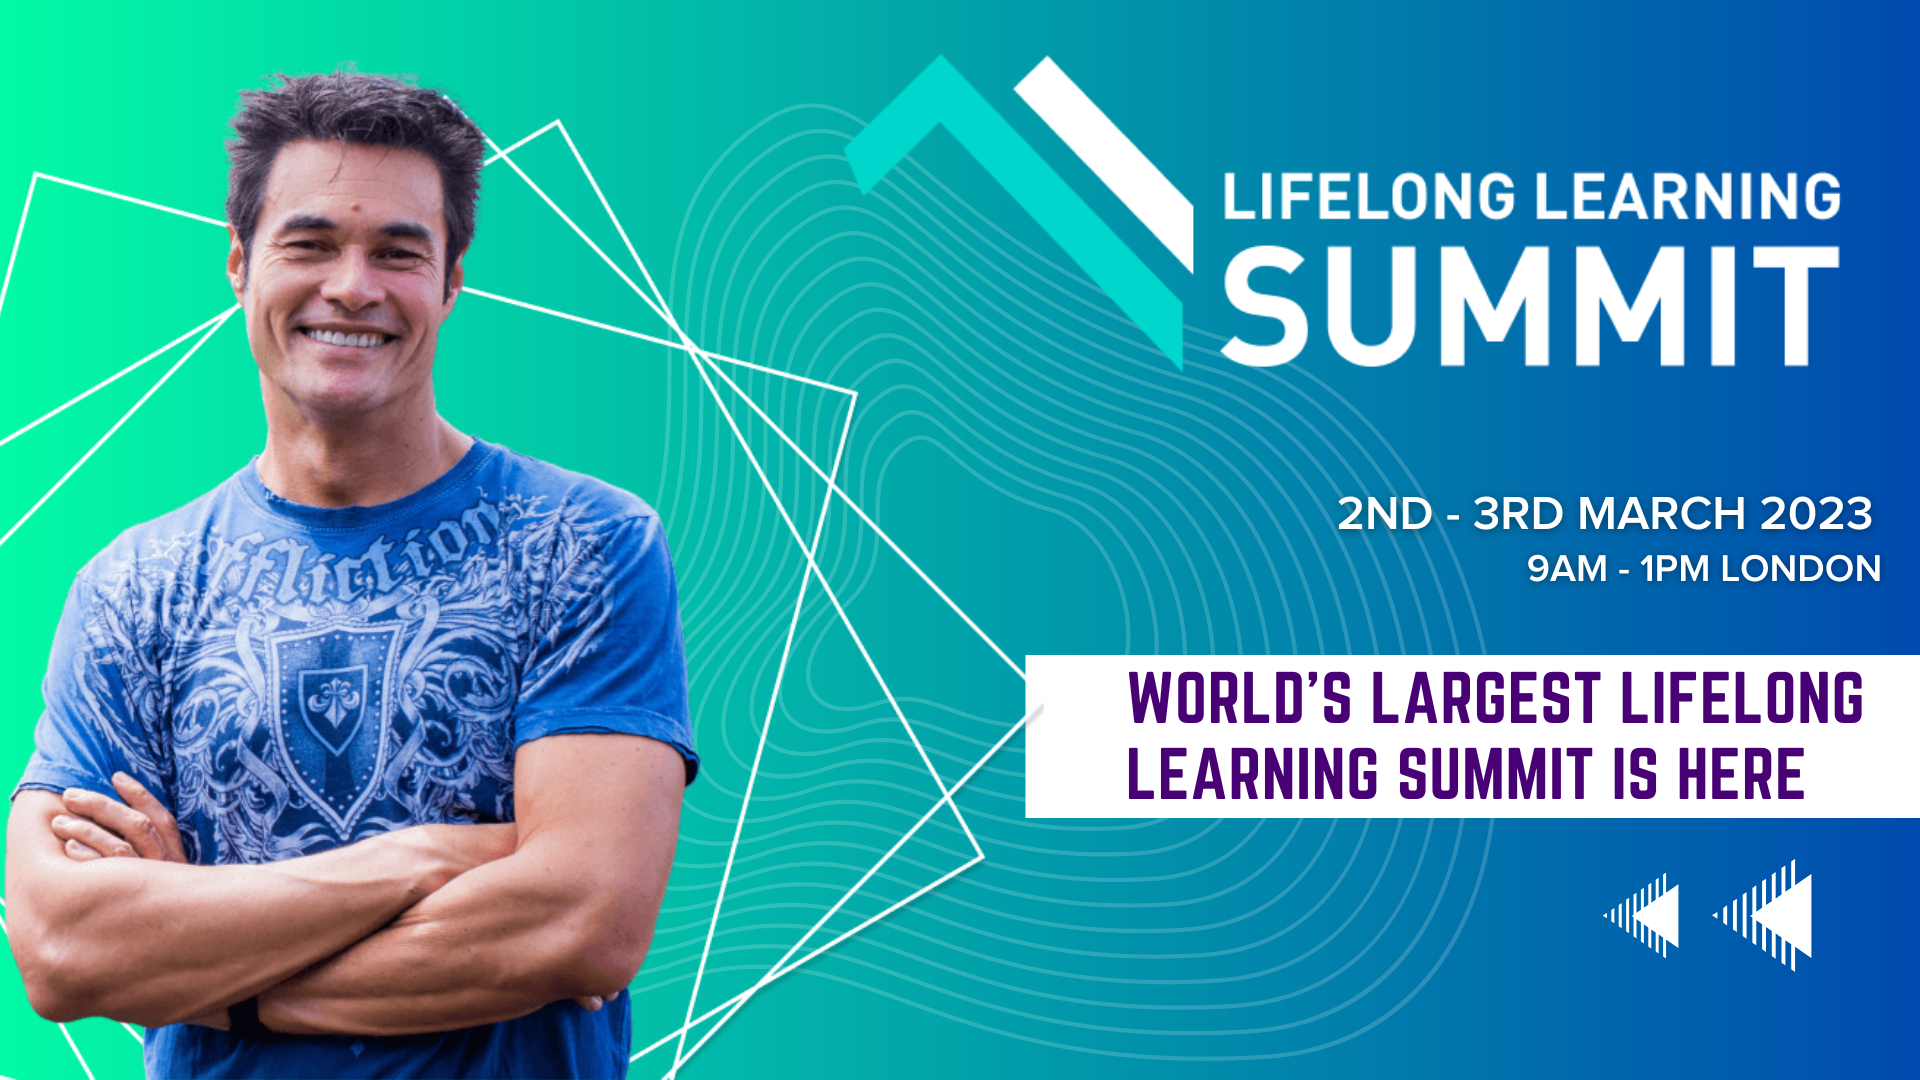 LIFELONG LEARNING SUMMIT, Online Event